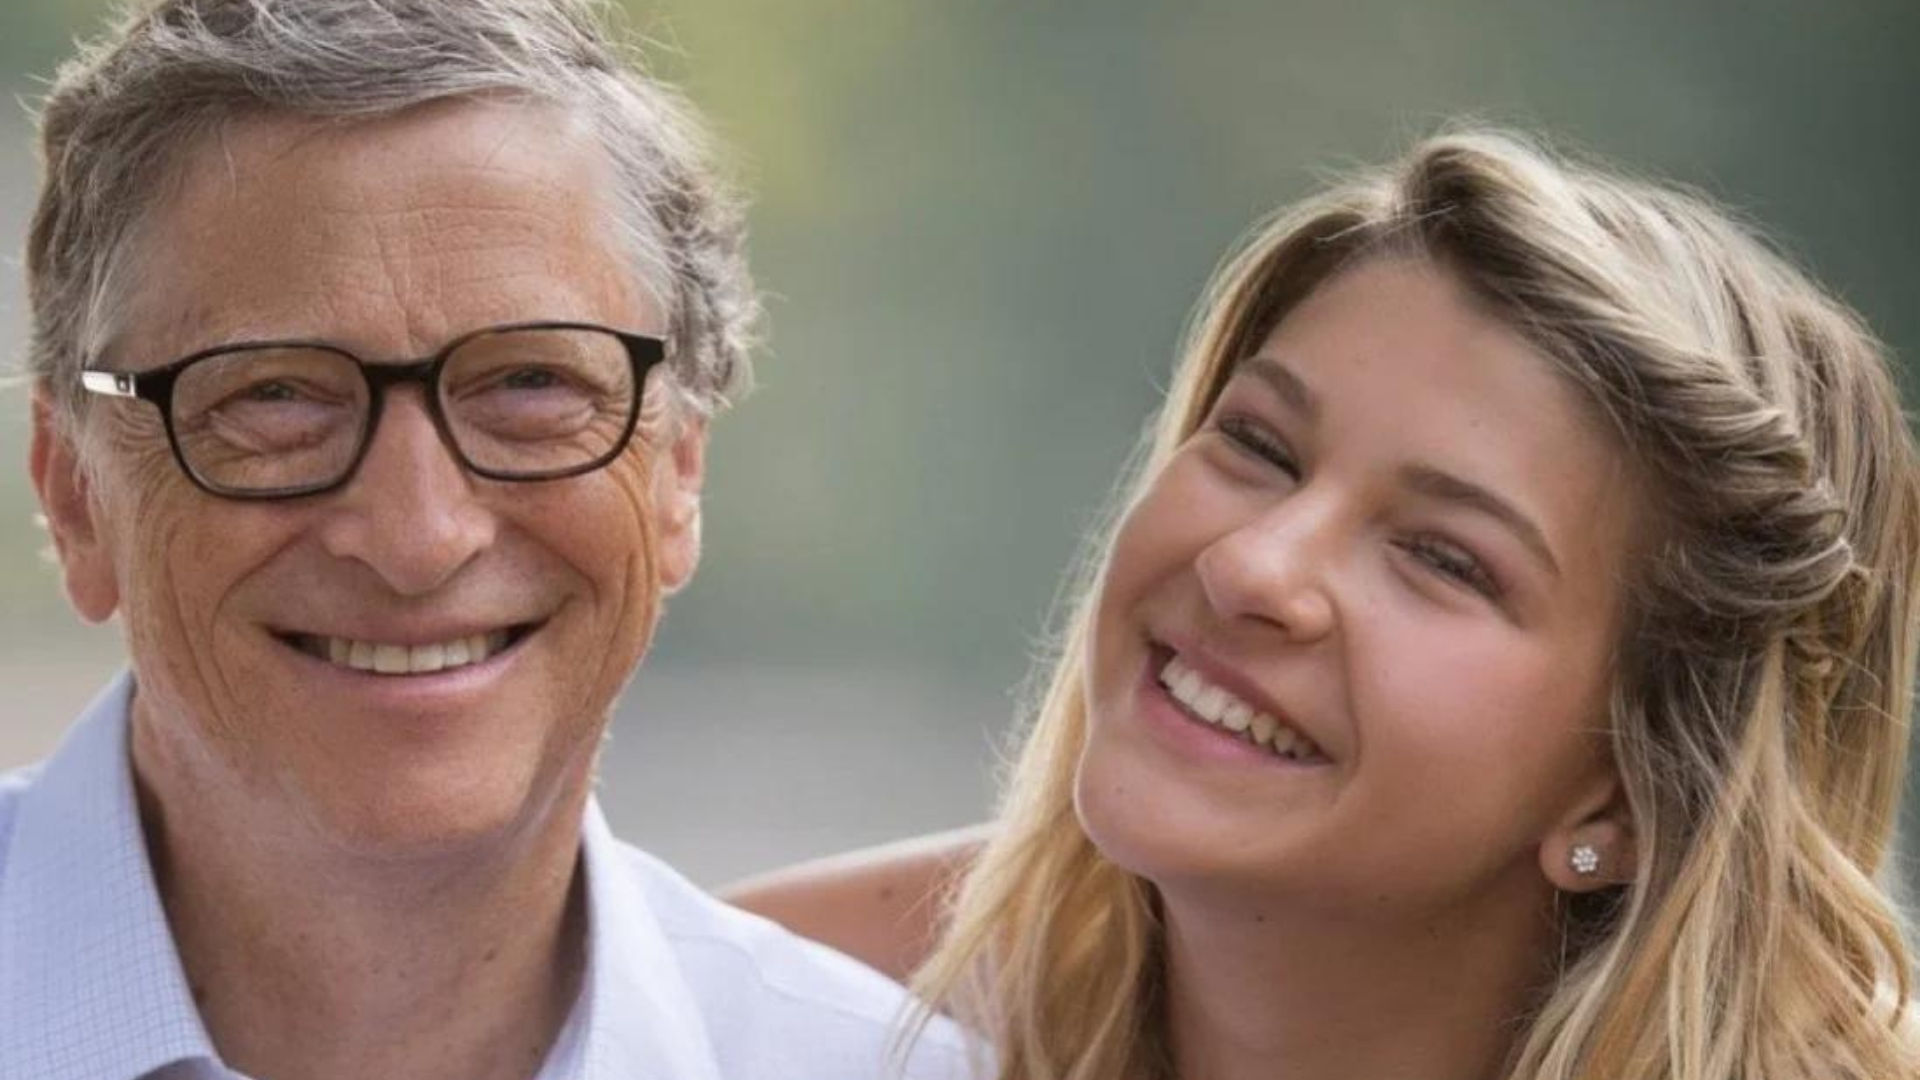 Phoebe Adele Gates smiling with her father bill gates